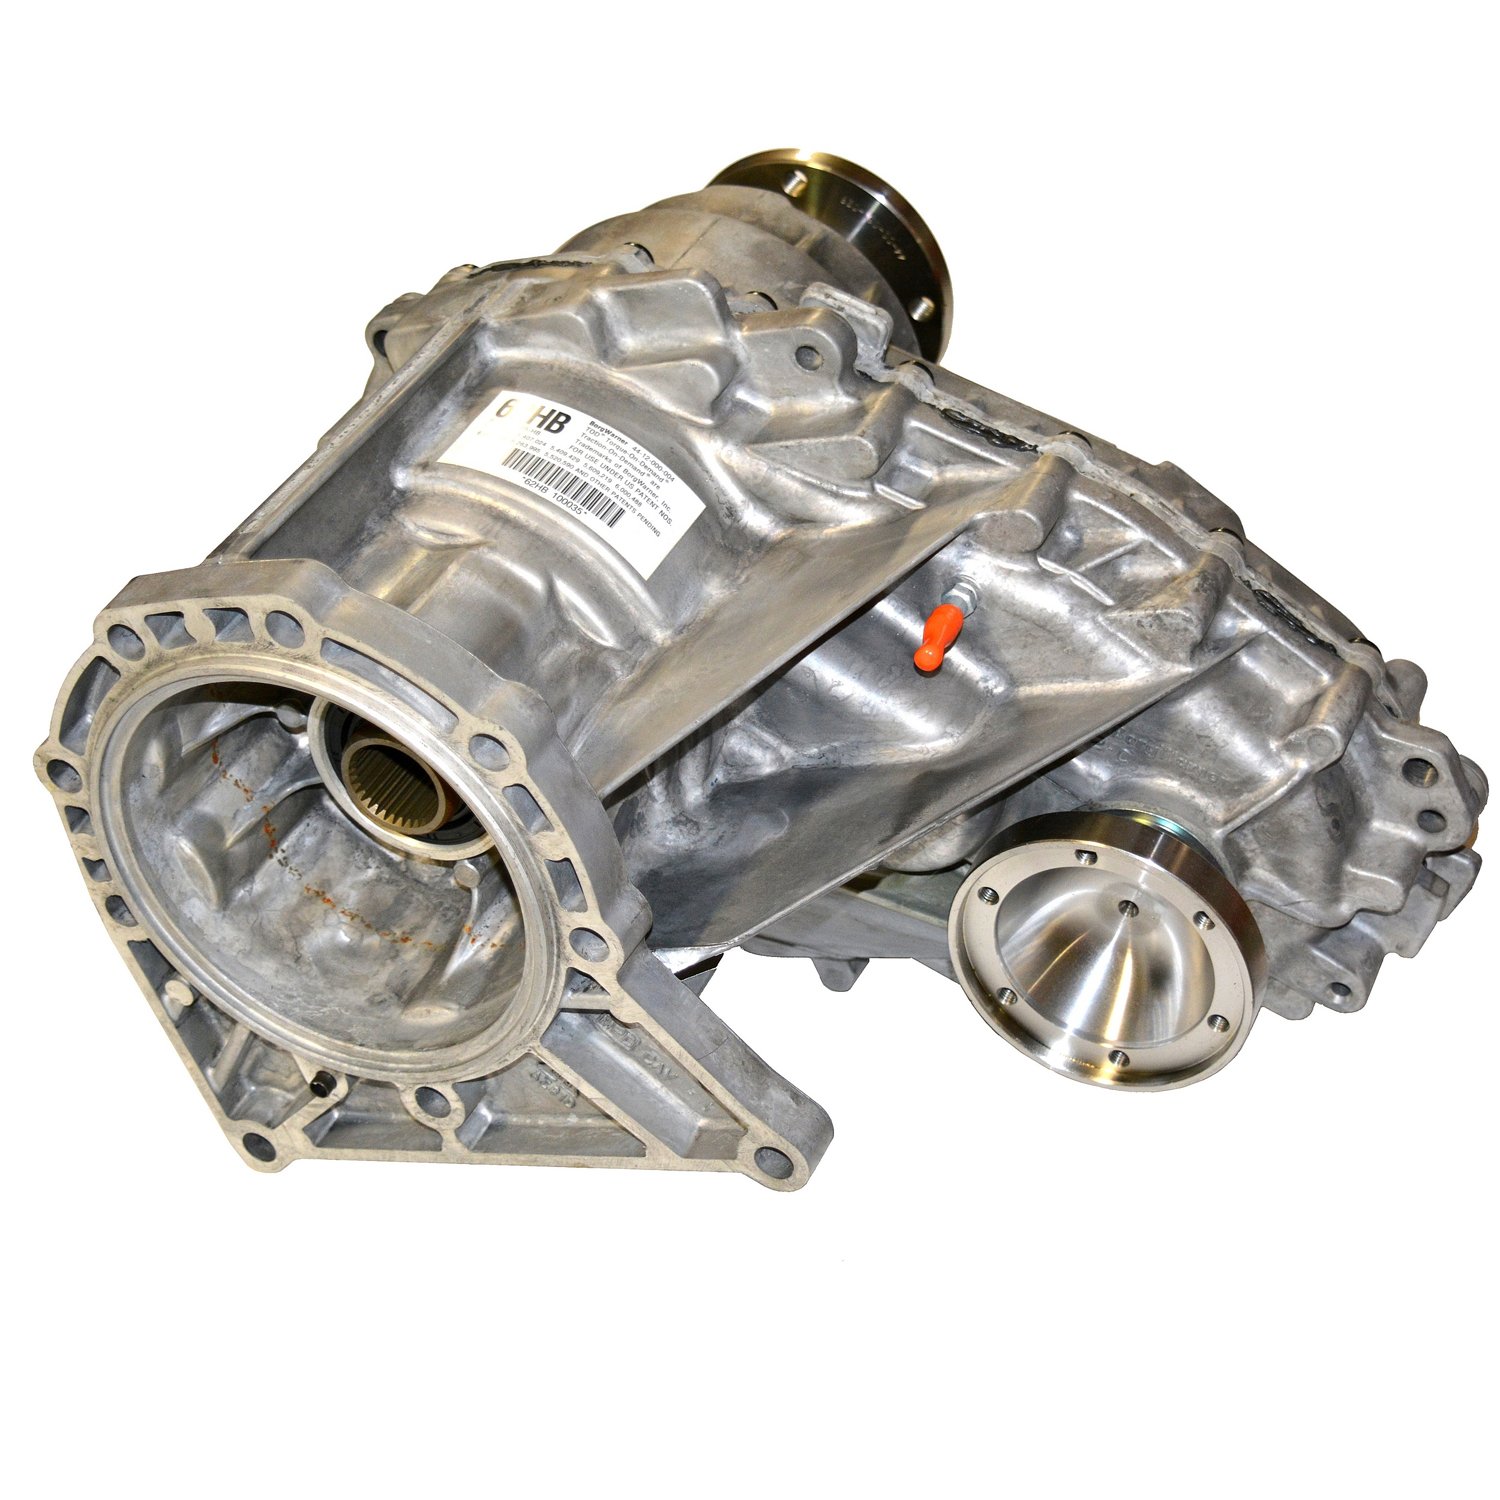 Remanufactured BW4412 Transfer Case for Ford 06-10 Explorer & Mountaineer 4.6L w/o Shift Motor